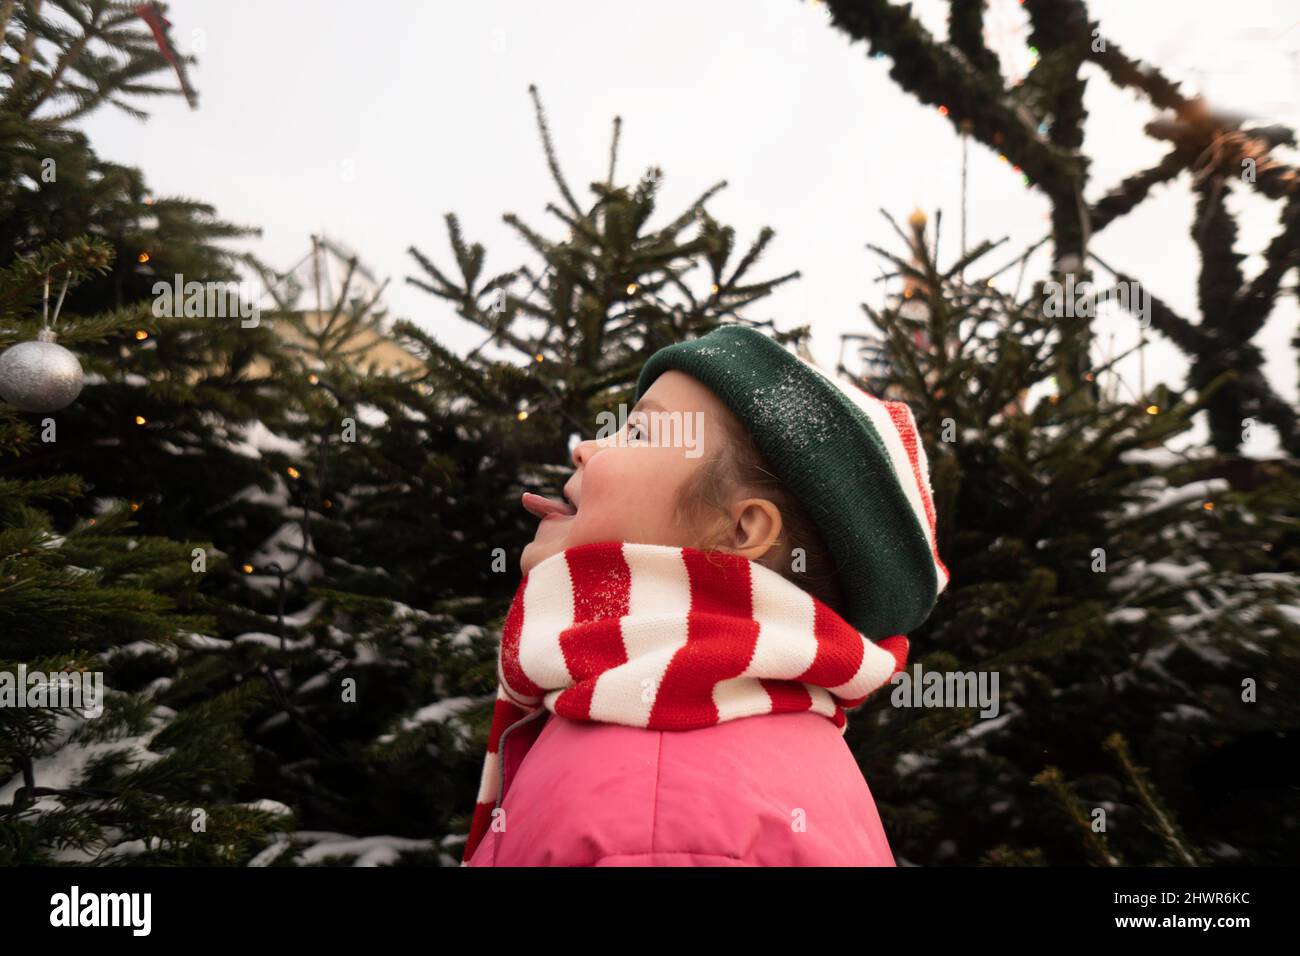 Girl sticking out tongue standing in front of Christmas tree Stock Photo